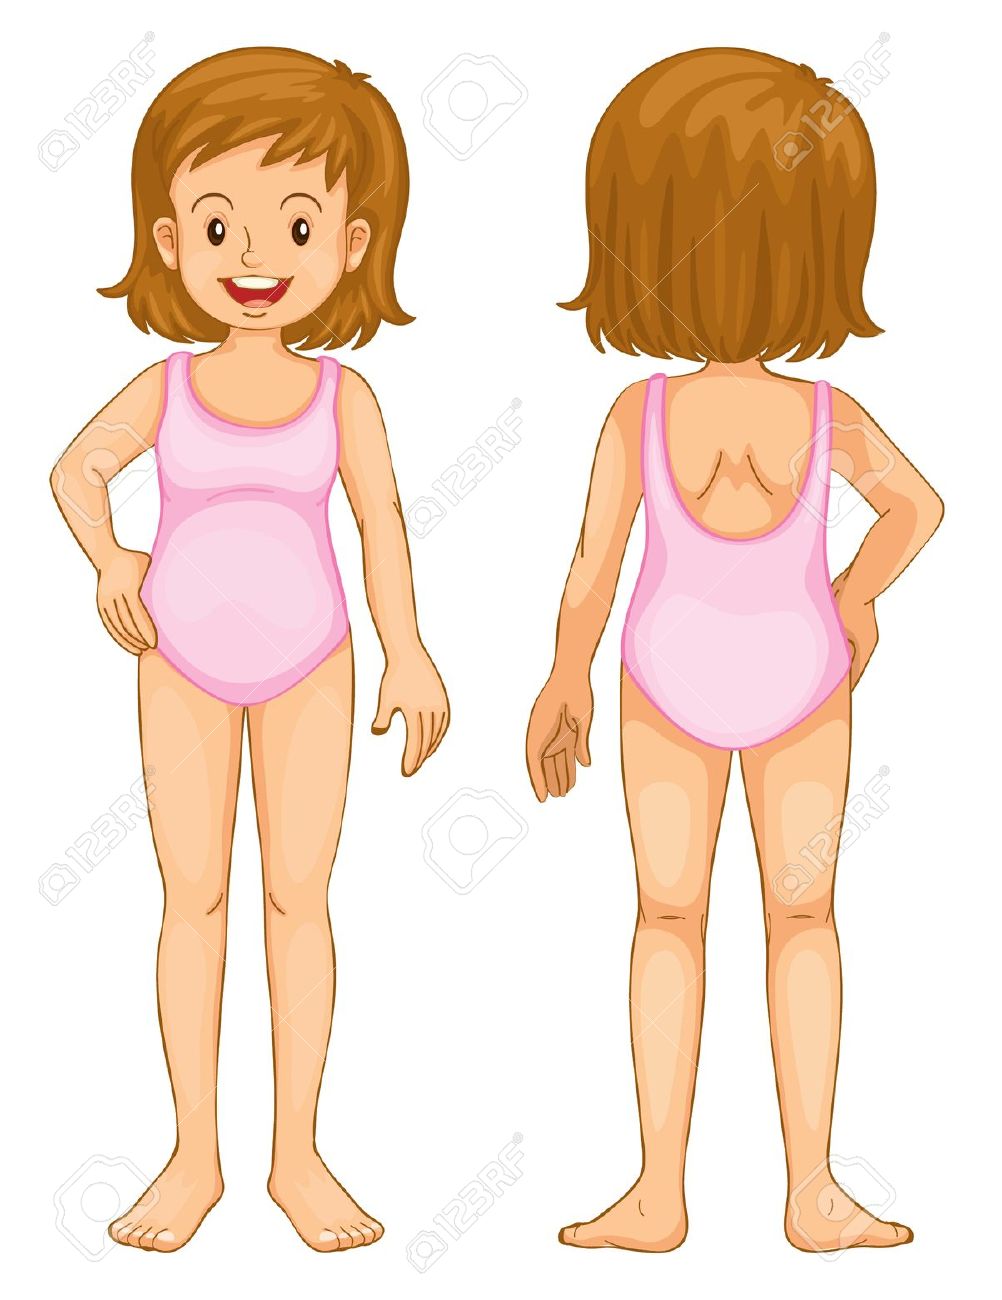 Body clipart illustration. Girl in the human